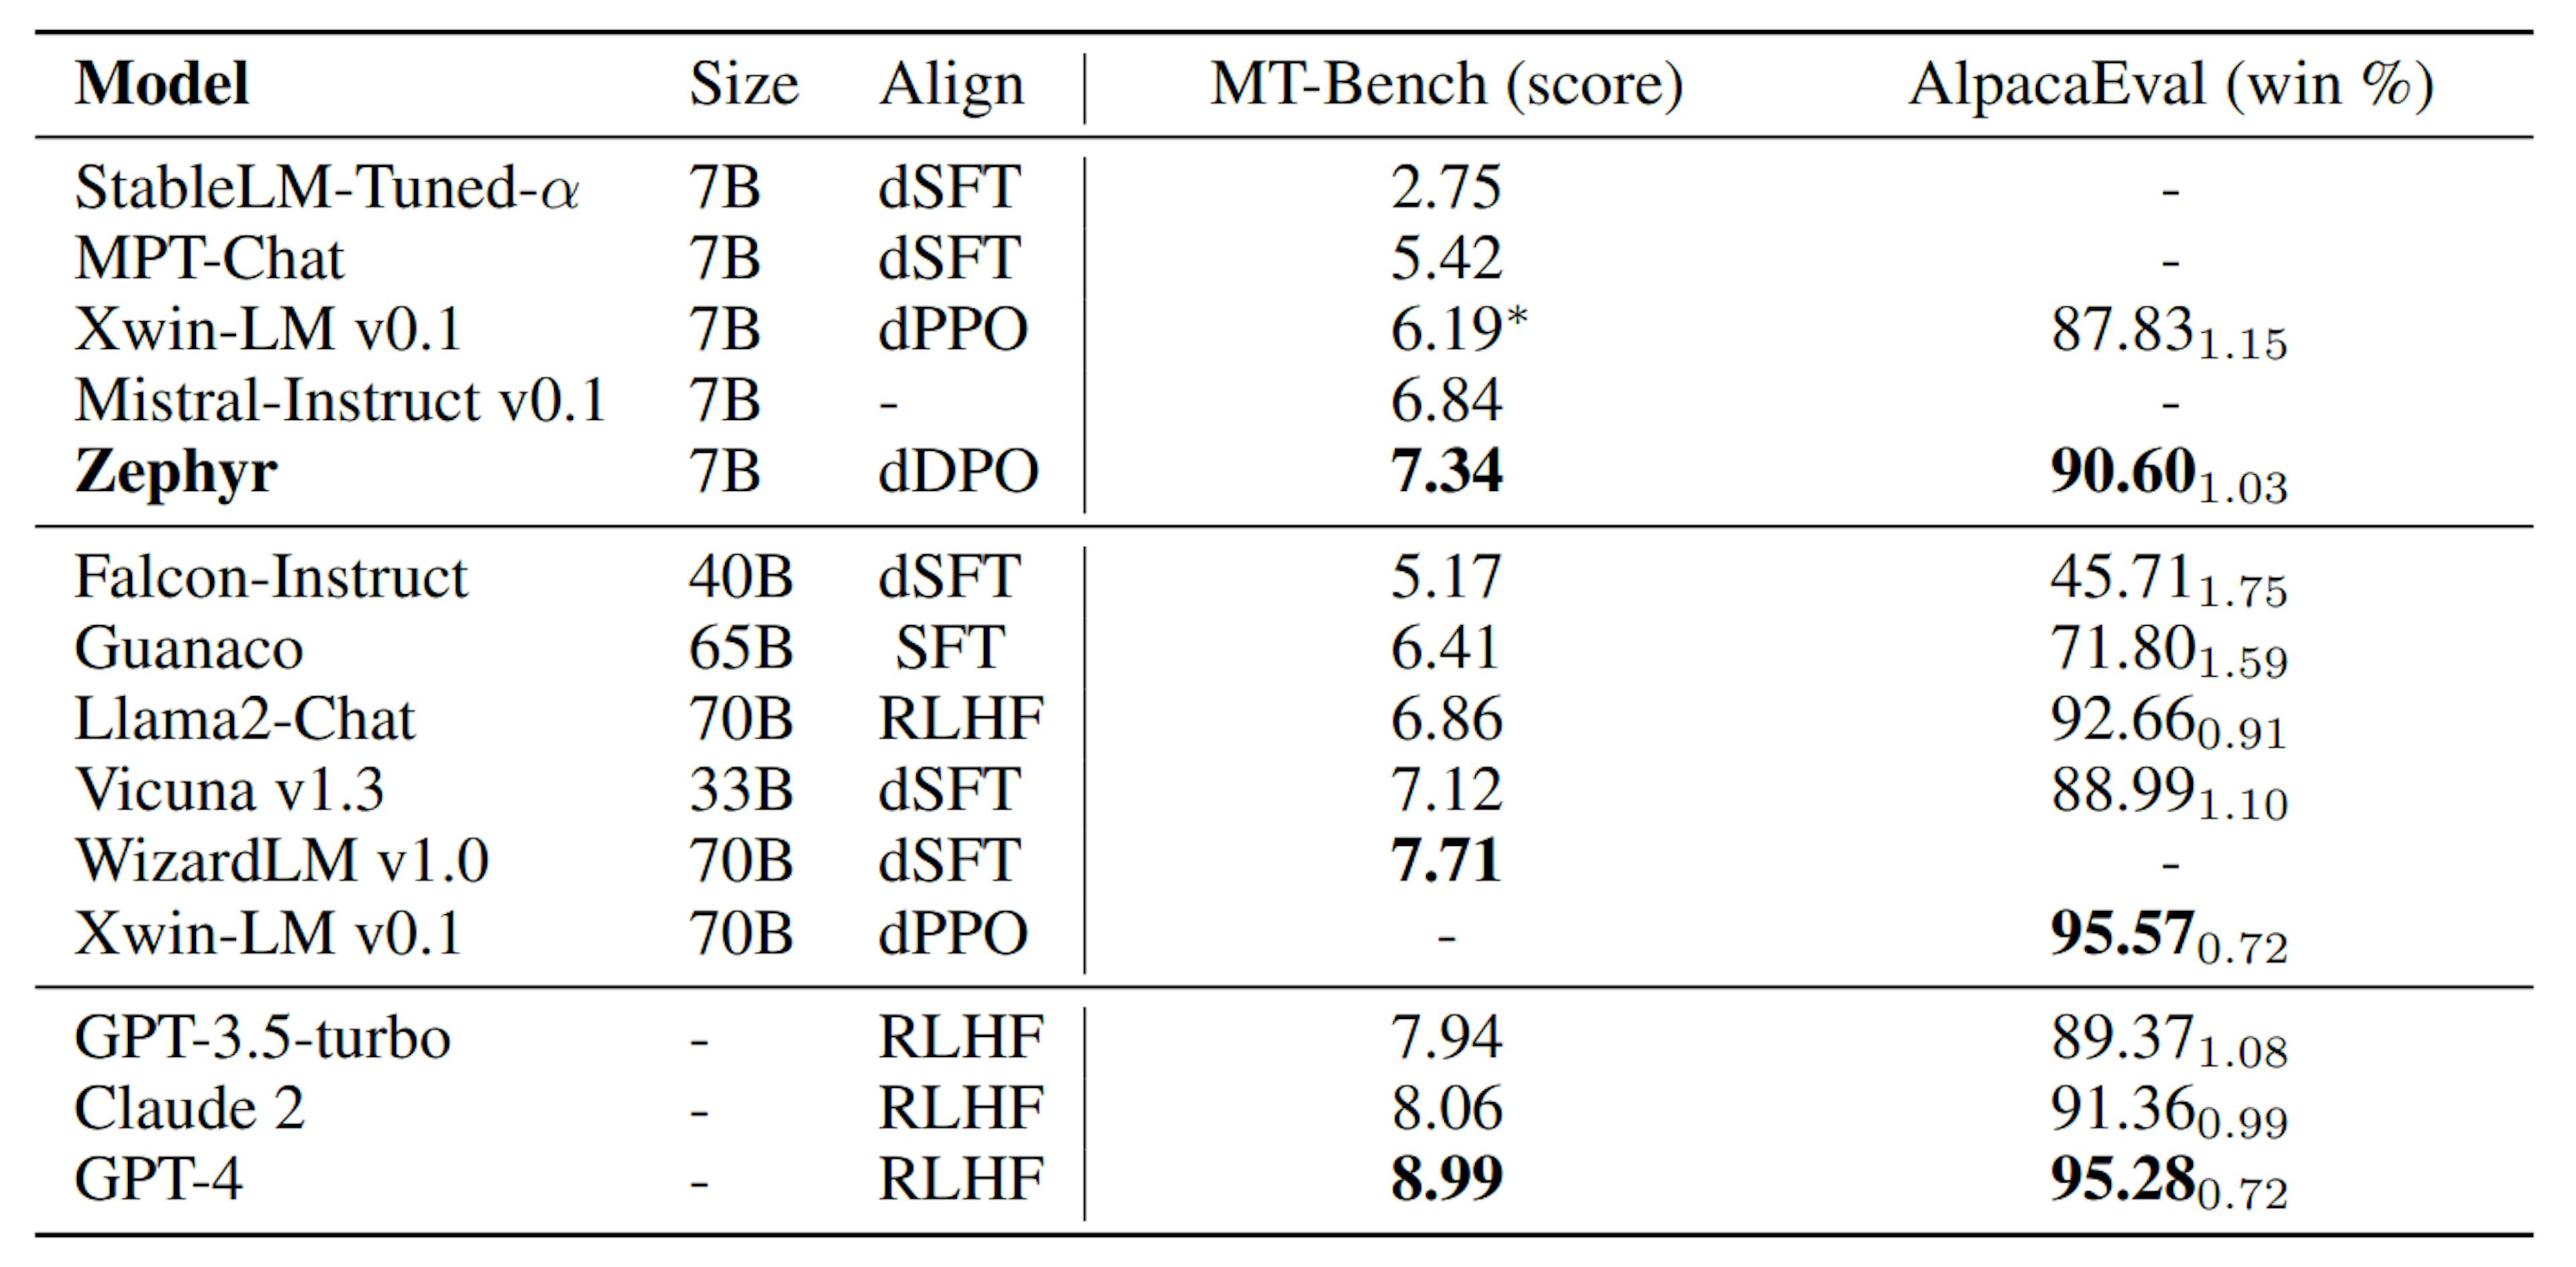 Table 1: Chat benchmark results for open-access and proprietary models on MT-Bench and AlpacaEval. A dash (−) indicates model or alignment information that is not publicly available, or an evaluation that is absent on the public leaderboards. Scores marked with an asterisk (∗) denote evaluations done by ourselves.